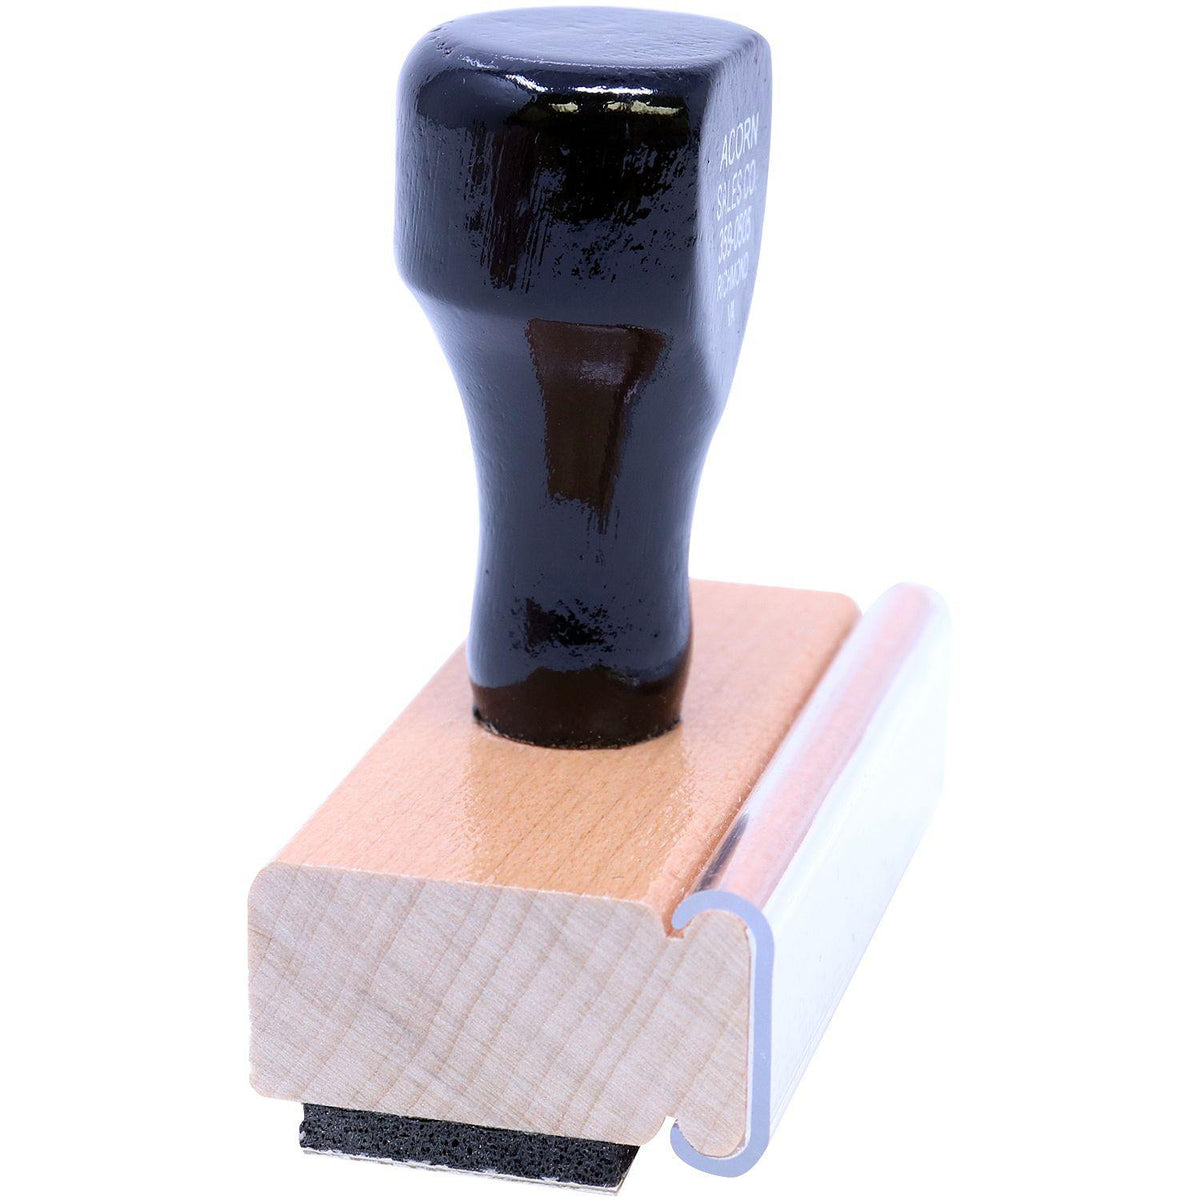 Mortgages Rubber Stamp - Engineer Seal Stamps - Brand_Acorn, Impression Size_Small, Stamp Type_Regular Stamp, Type of Use_Finance